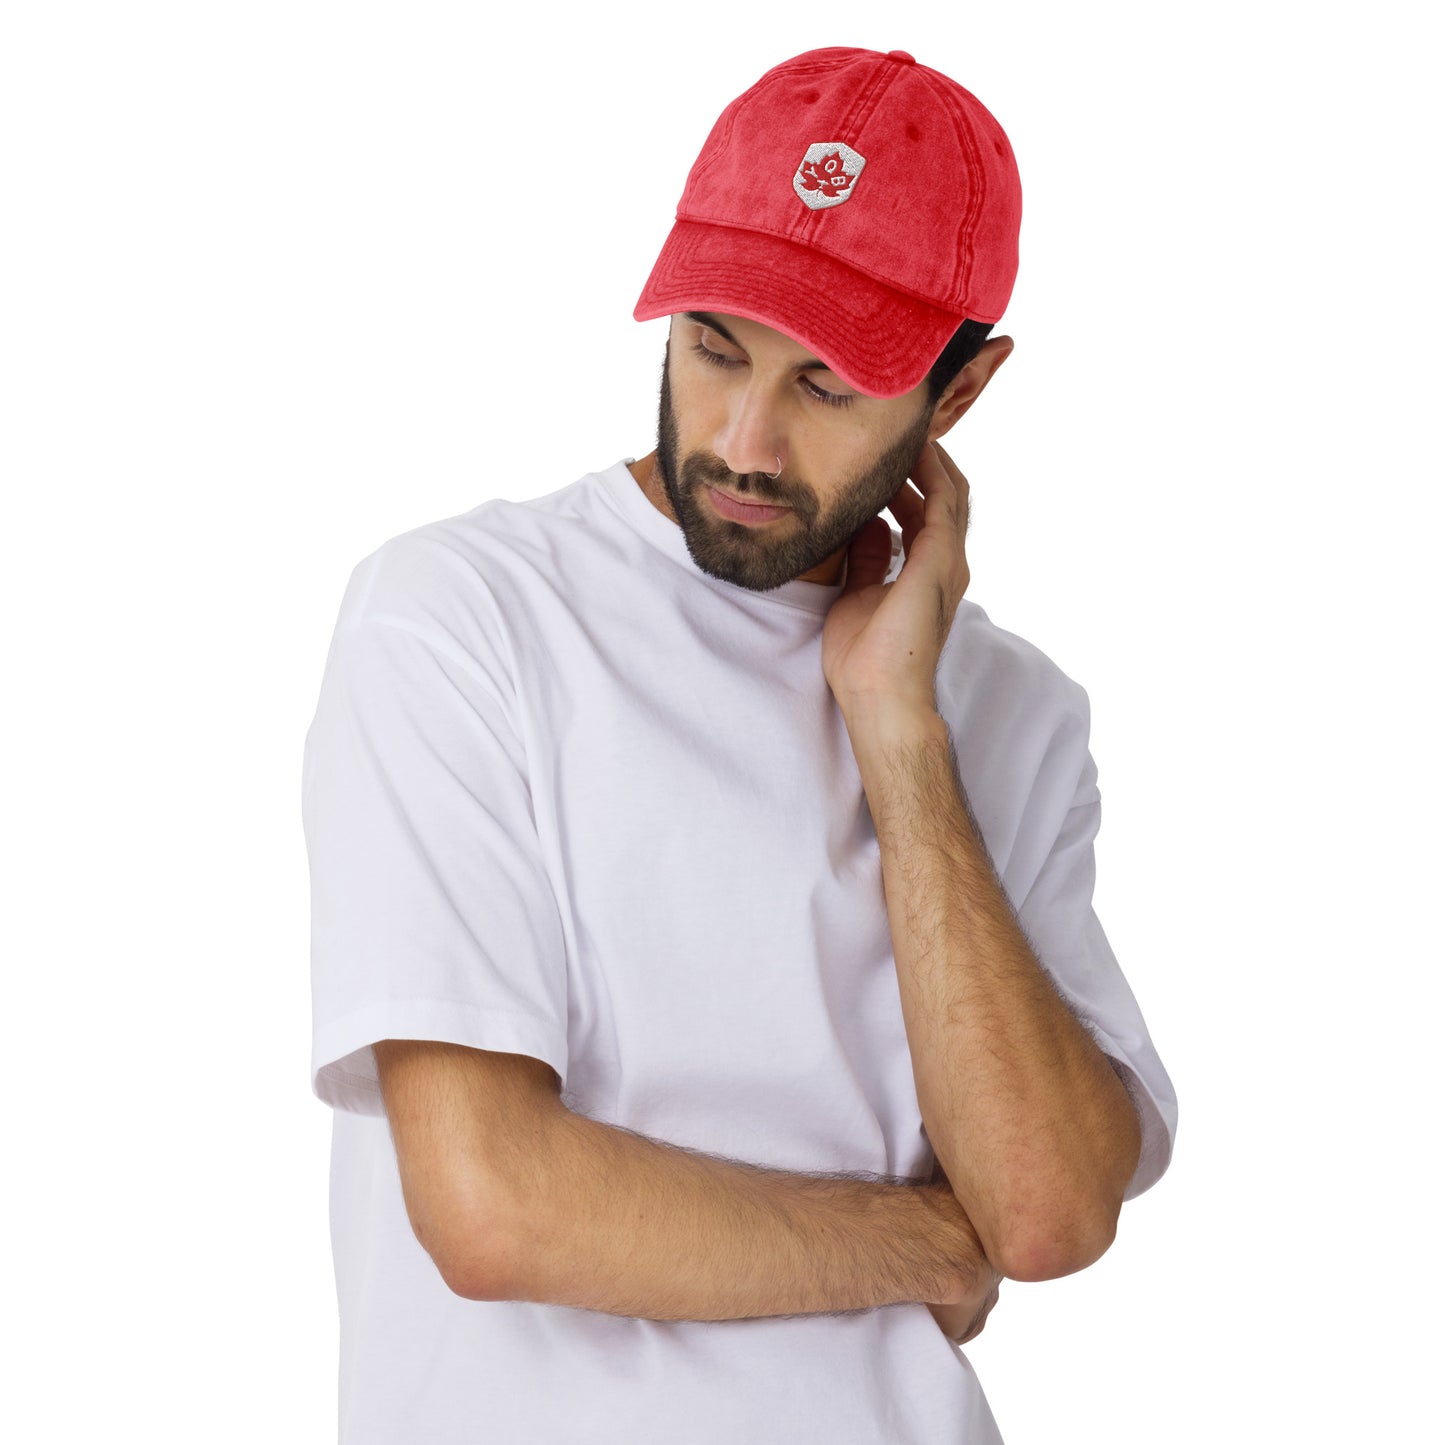 Maple Leaf Twill Cap - Red/White • YQB Quebec City • YHM Designs - Image 11